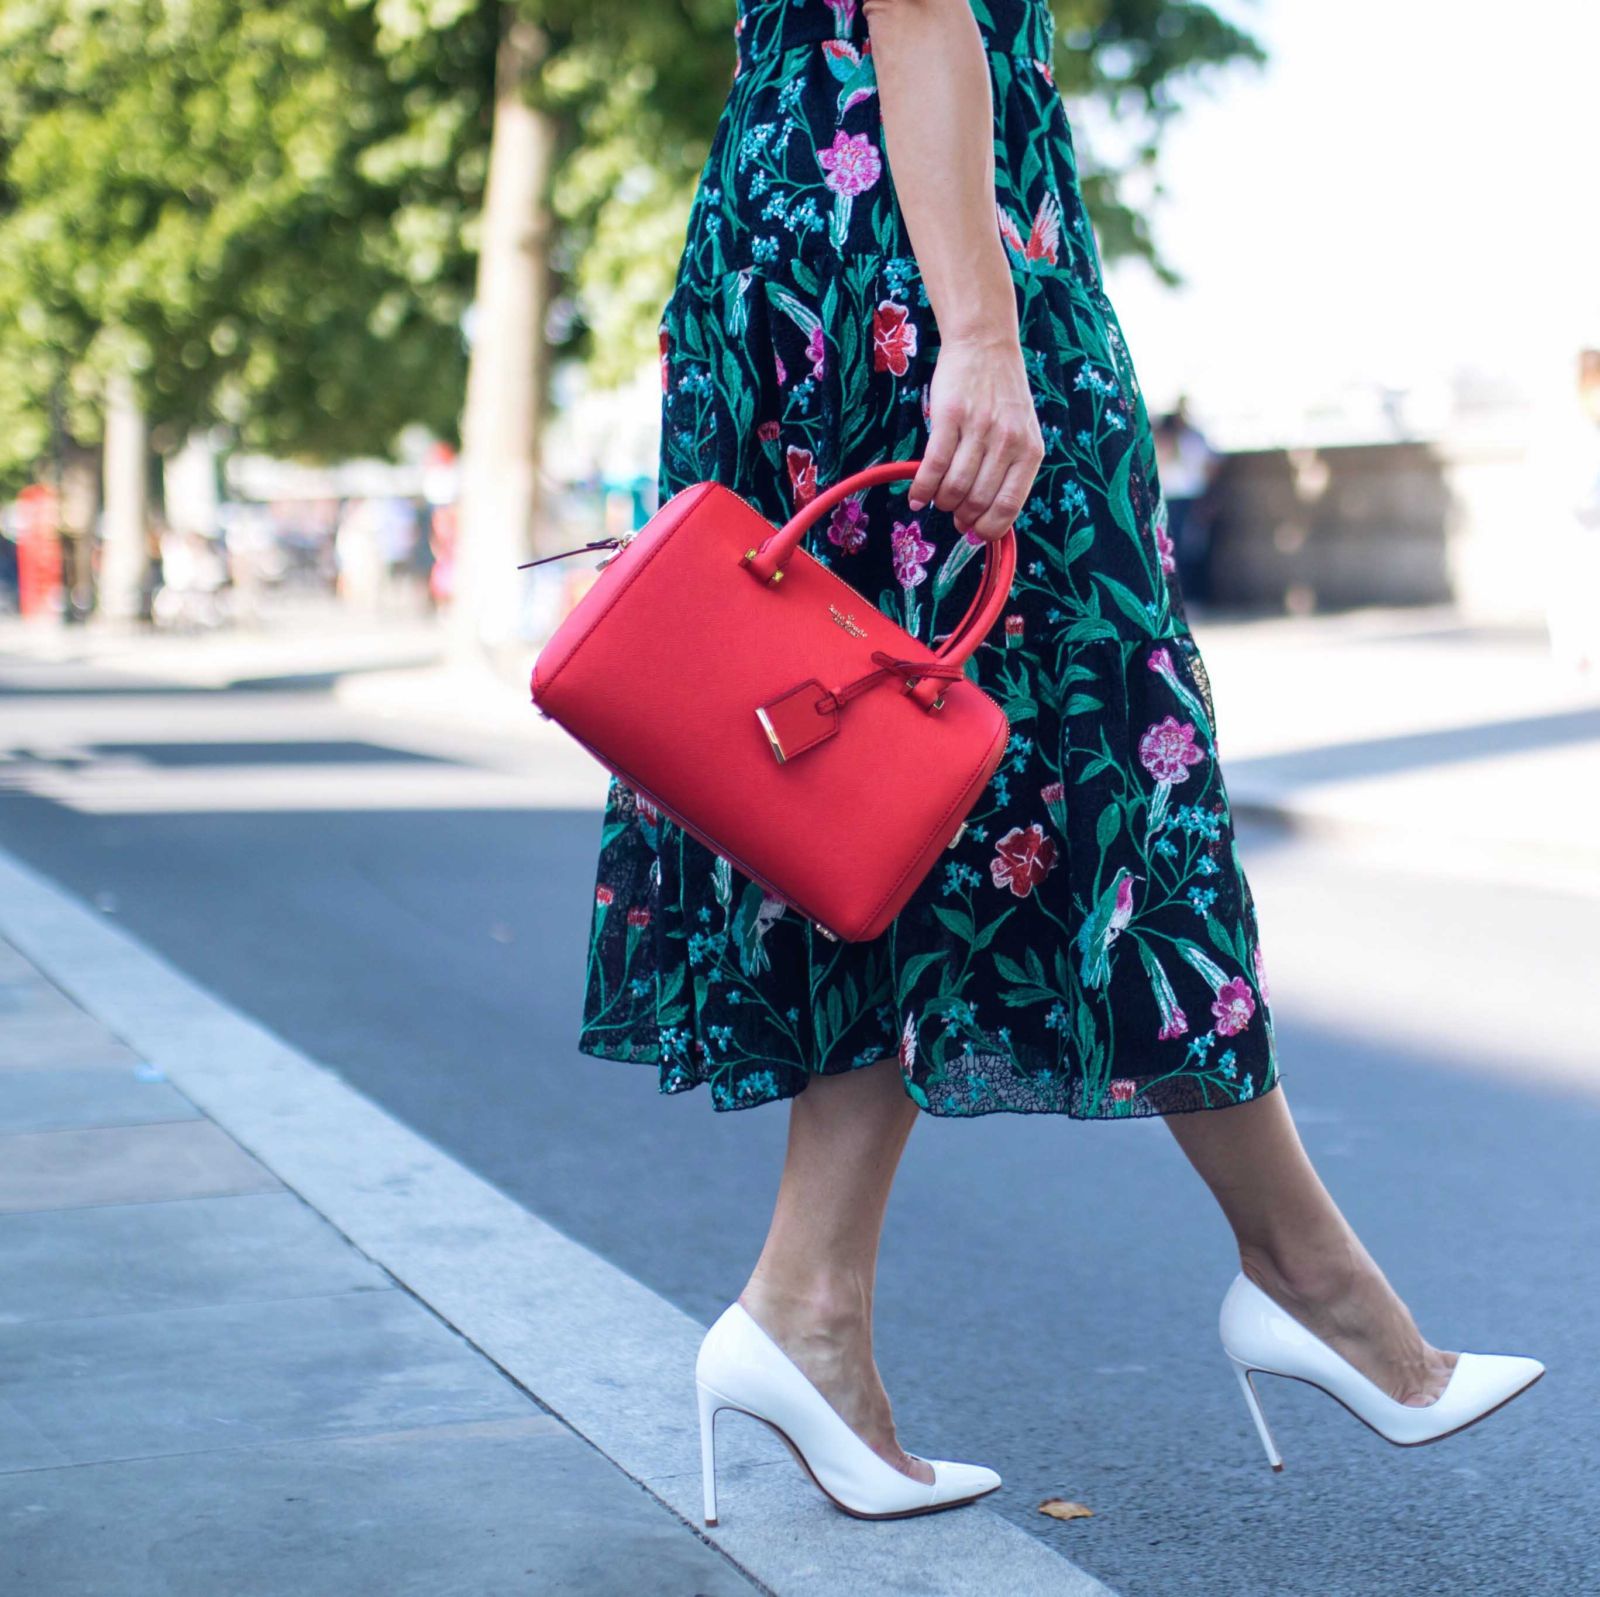 Kate Spade in the City - JULIET ANGUS